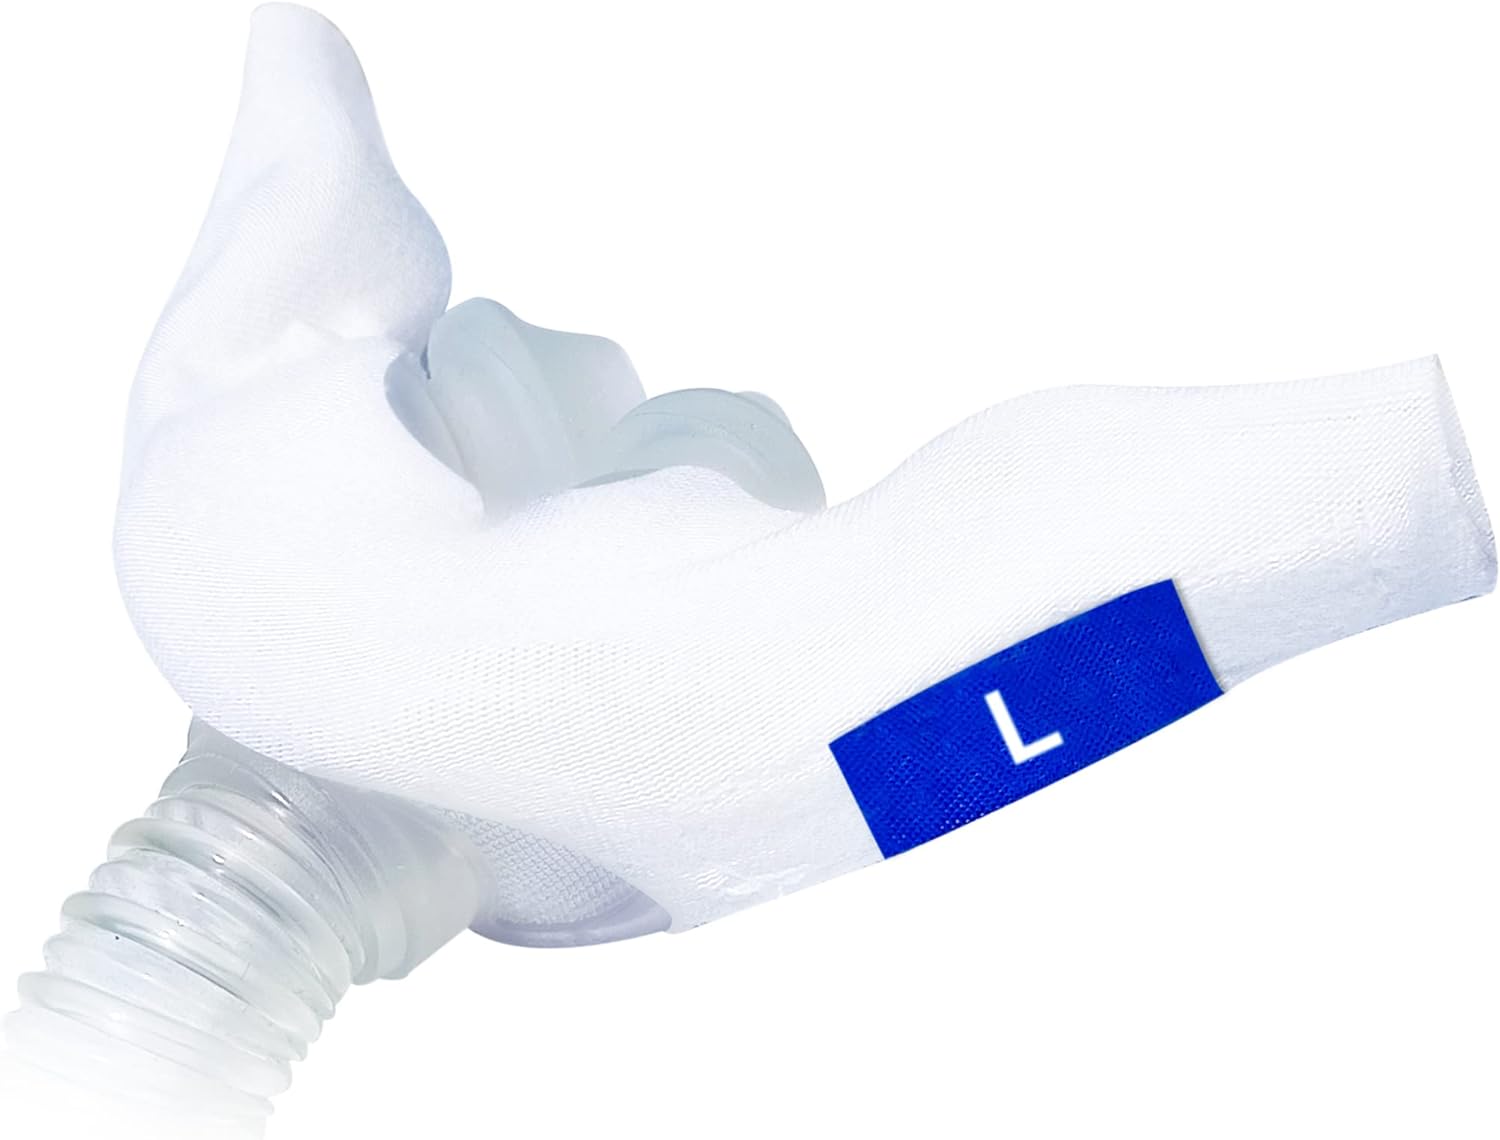 Resplabs Cpap Mask Liners Compatible With The Resmed Airfit P10 Nasal Pillow Resplabs 2691